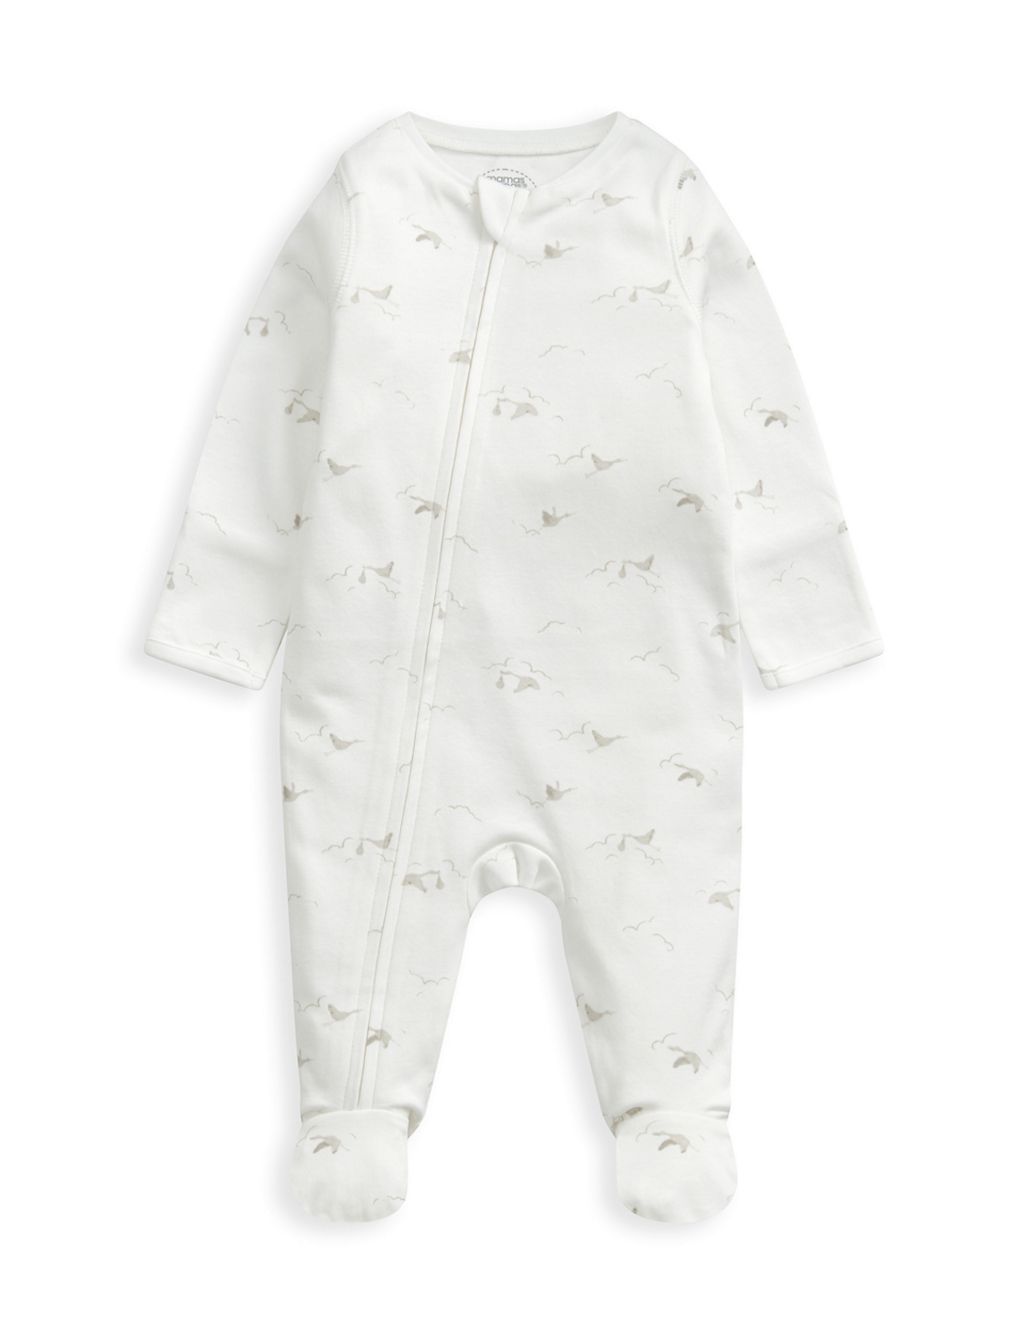 Stork Print Zip All In One (6½lbs-12 Mths) 1 of 5